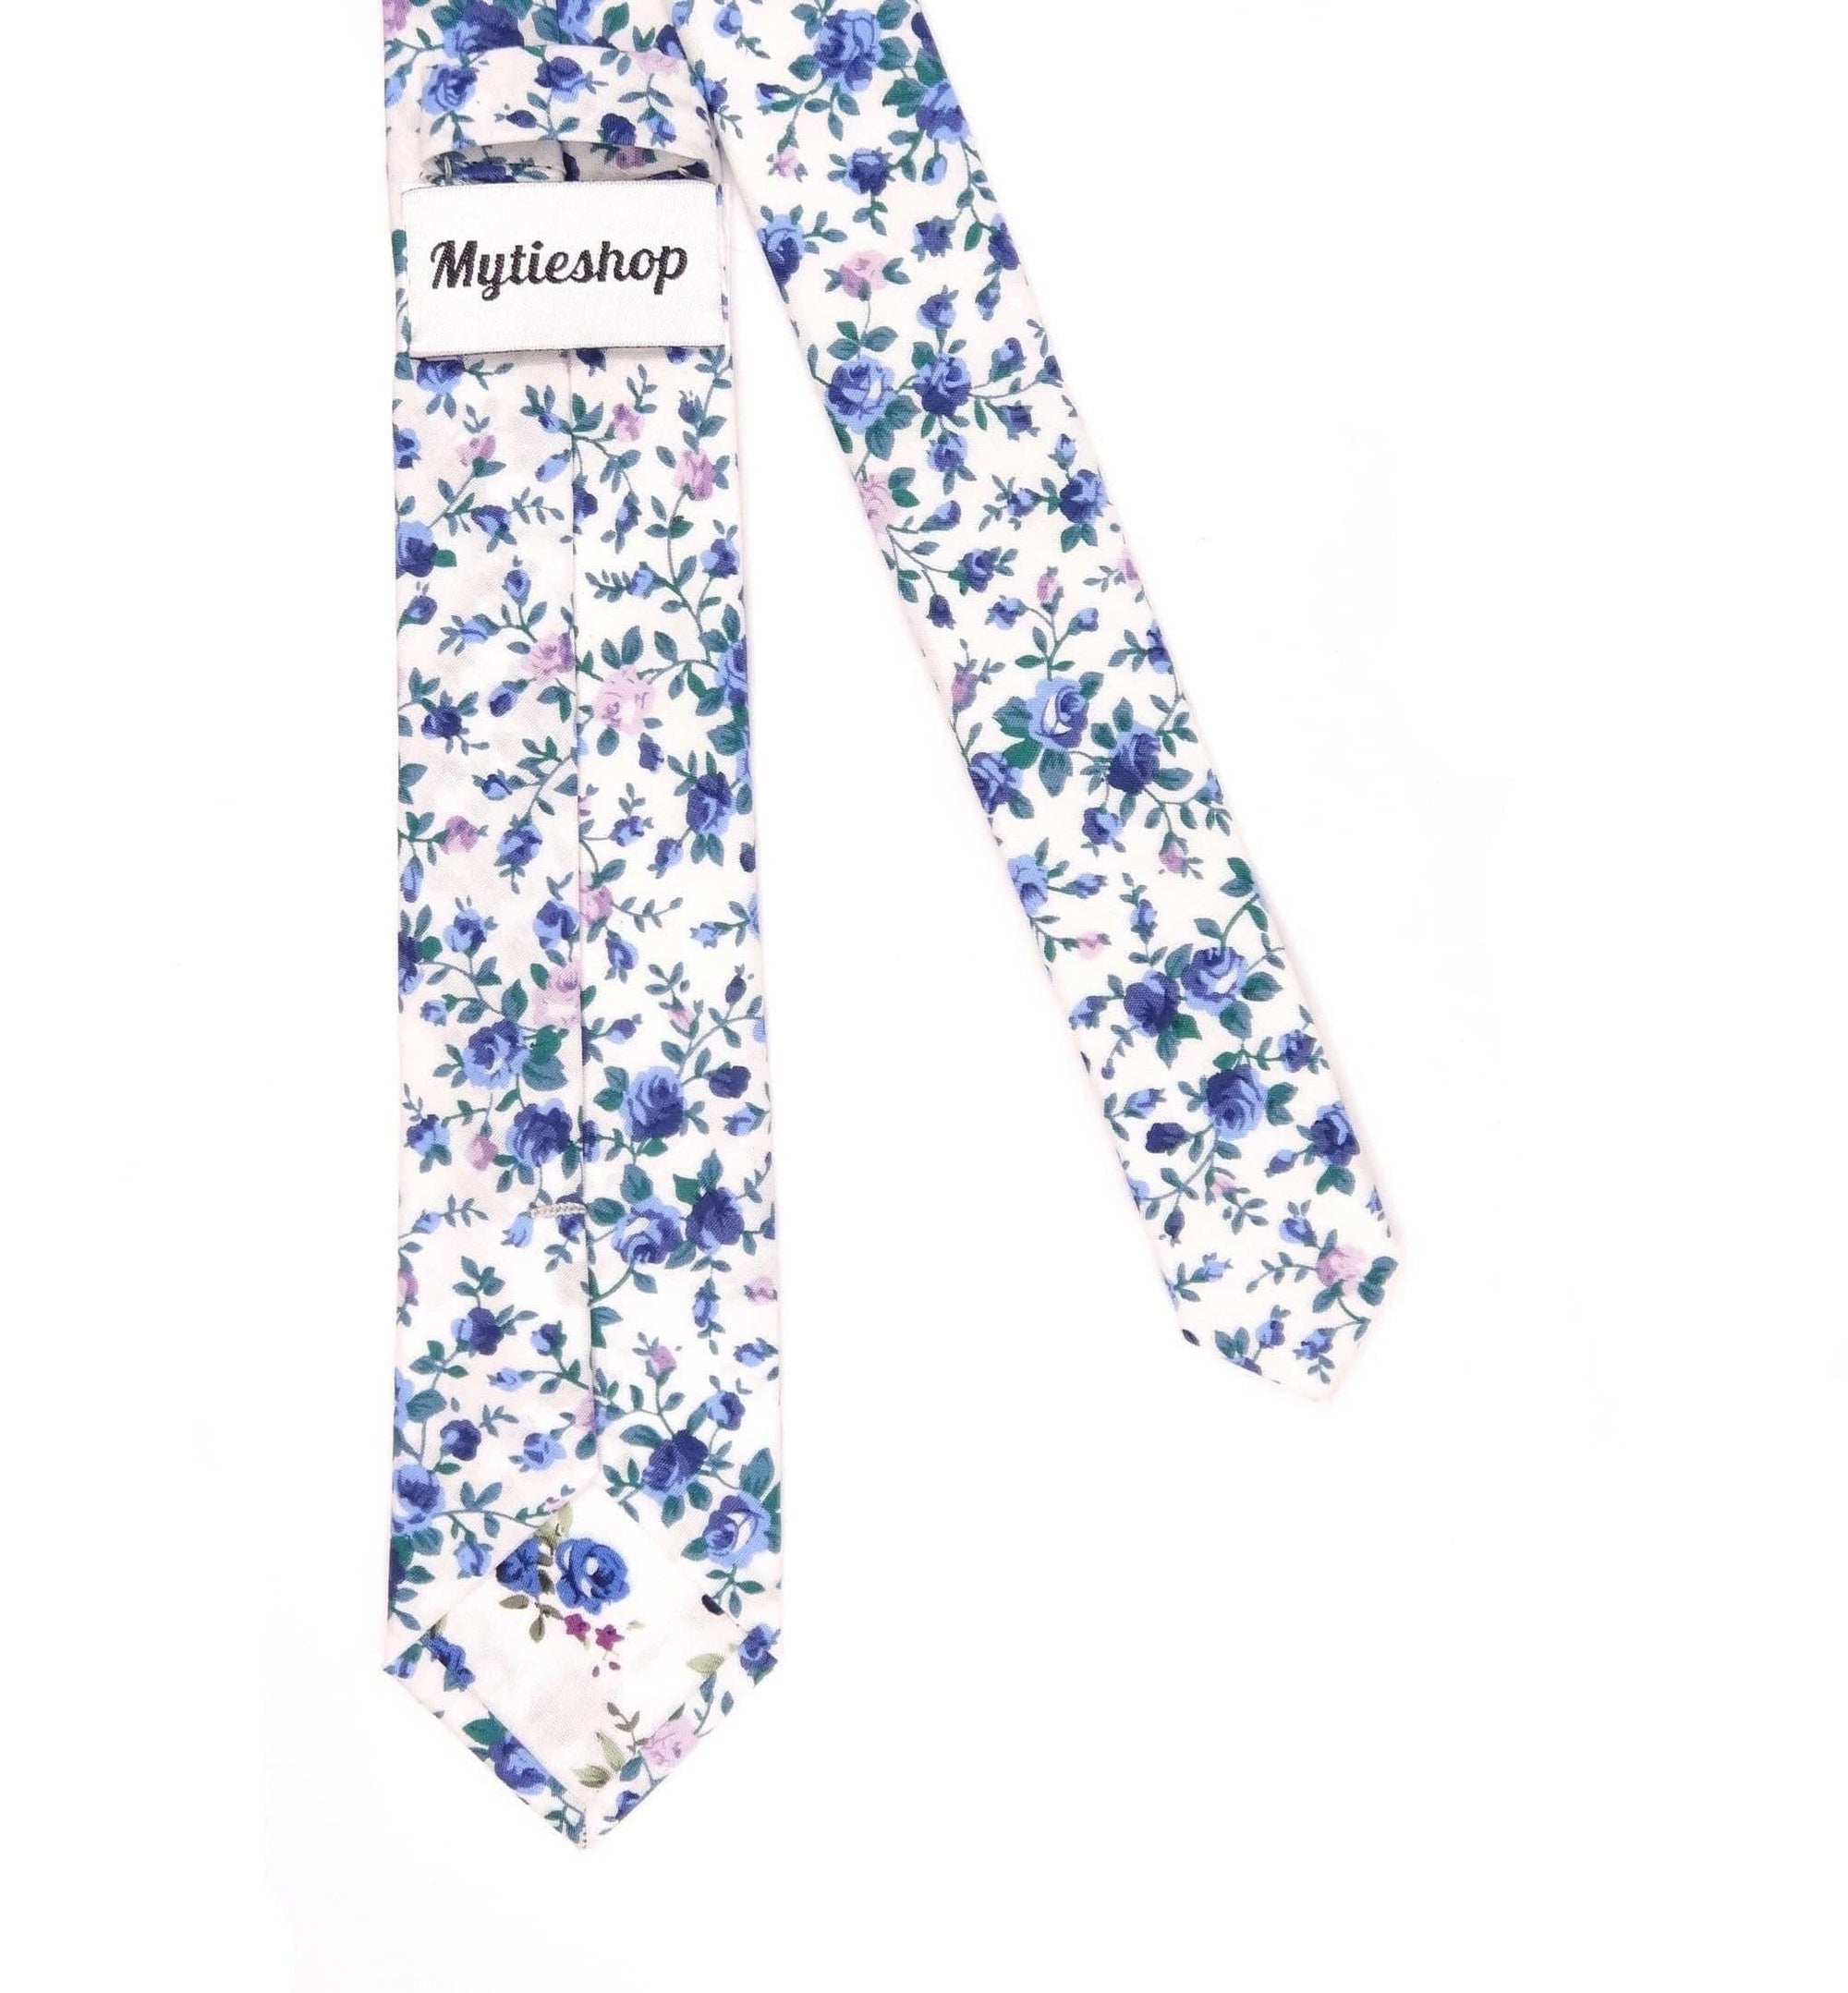 White Floral Skinny Tie 2.36&quot; Skinny WISTERIA MYTIESHOP-Neckties-White Floral Skinny Tie WISTERIA Floral Necktie for weddings and events, great for prom and anniversary gifts. Mens floral ties near me us ties tie-Mytieshop. Skinny ties for weddings anniversaries. Father of bride. Groomsmen. Cool skinny neckties for men. Neckwear for prom, missions and fancy events. Gift ideas for men. Anniversaries ideas. Wedding aesthetics. Flower ties. Dry flower ties.